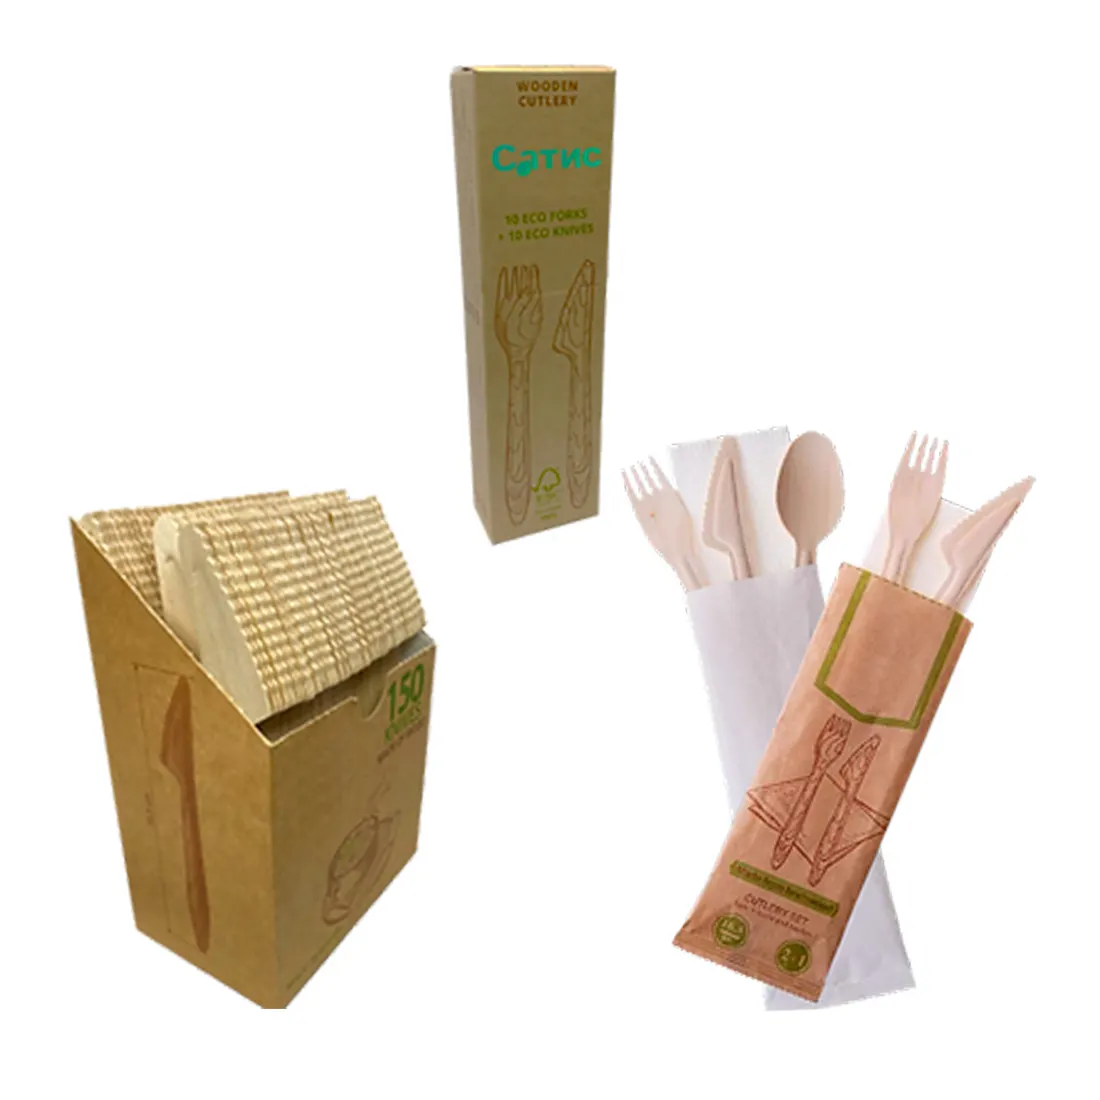 Customized design 100% birch veneer disposable wooden cutlery dicposable forks spoons knives for meal